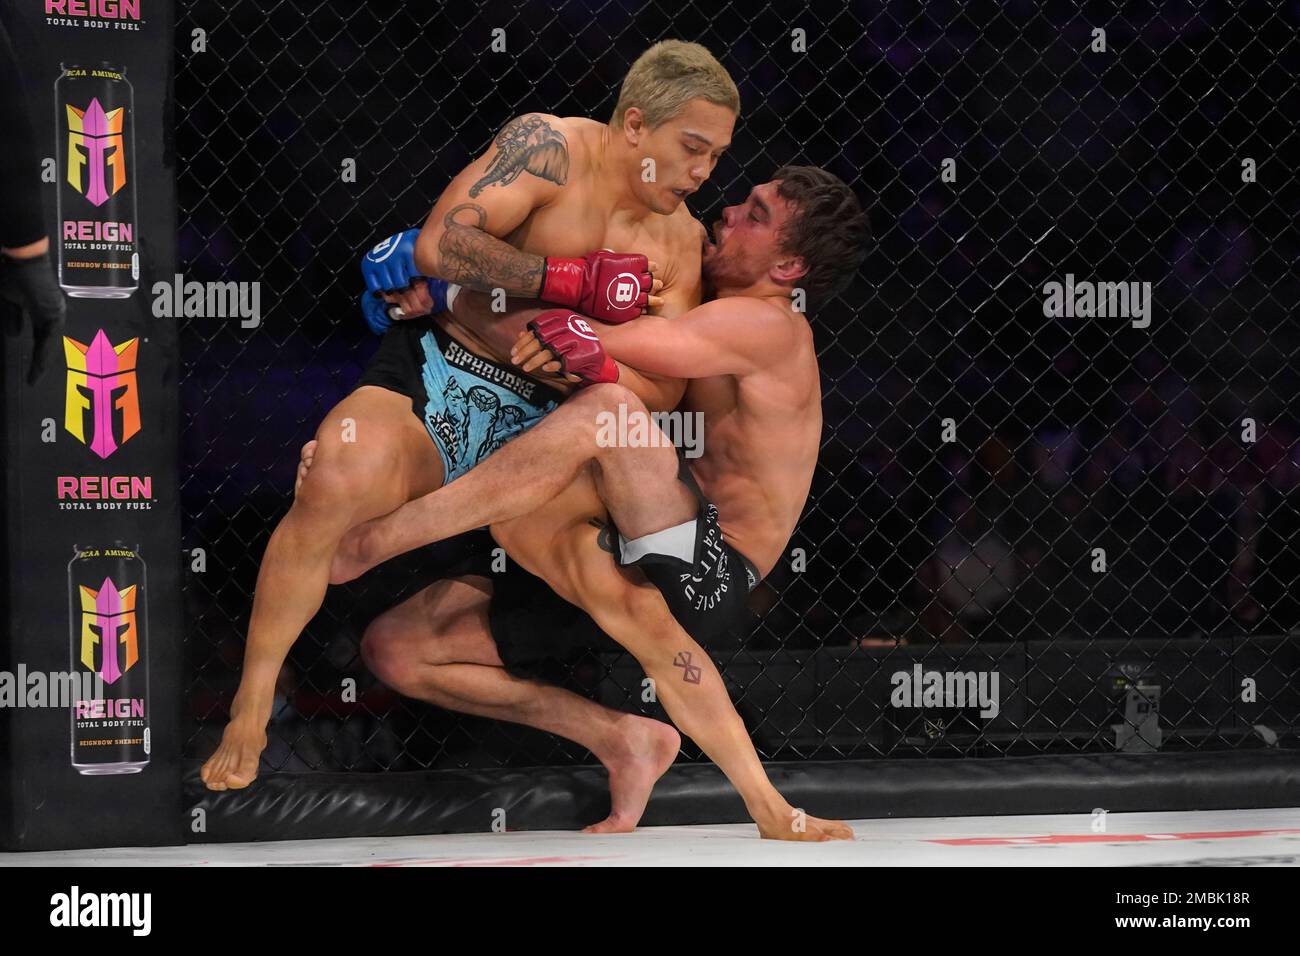 Tyson Siphavong-Miller, left, fights Rhalan Gracie during a welterweight fight at the Bellator 277 mixed martial arts event in San Jose, Calif., Friday, April 15, 2022